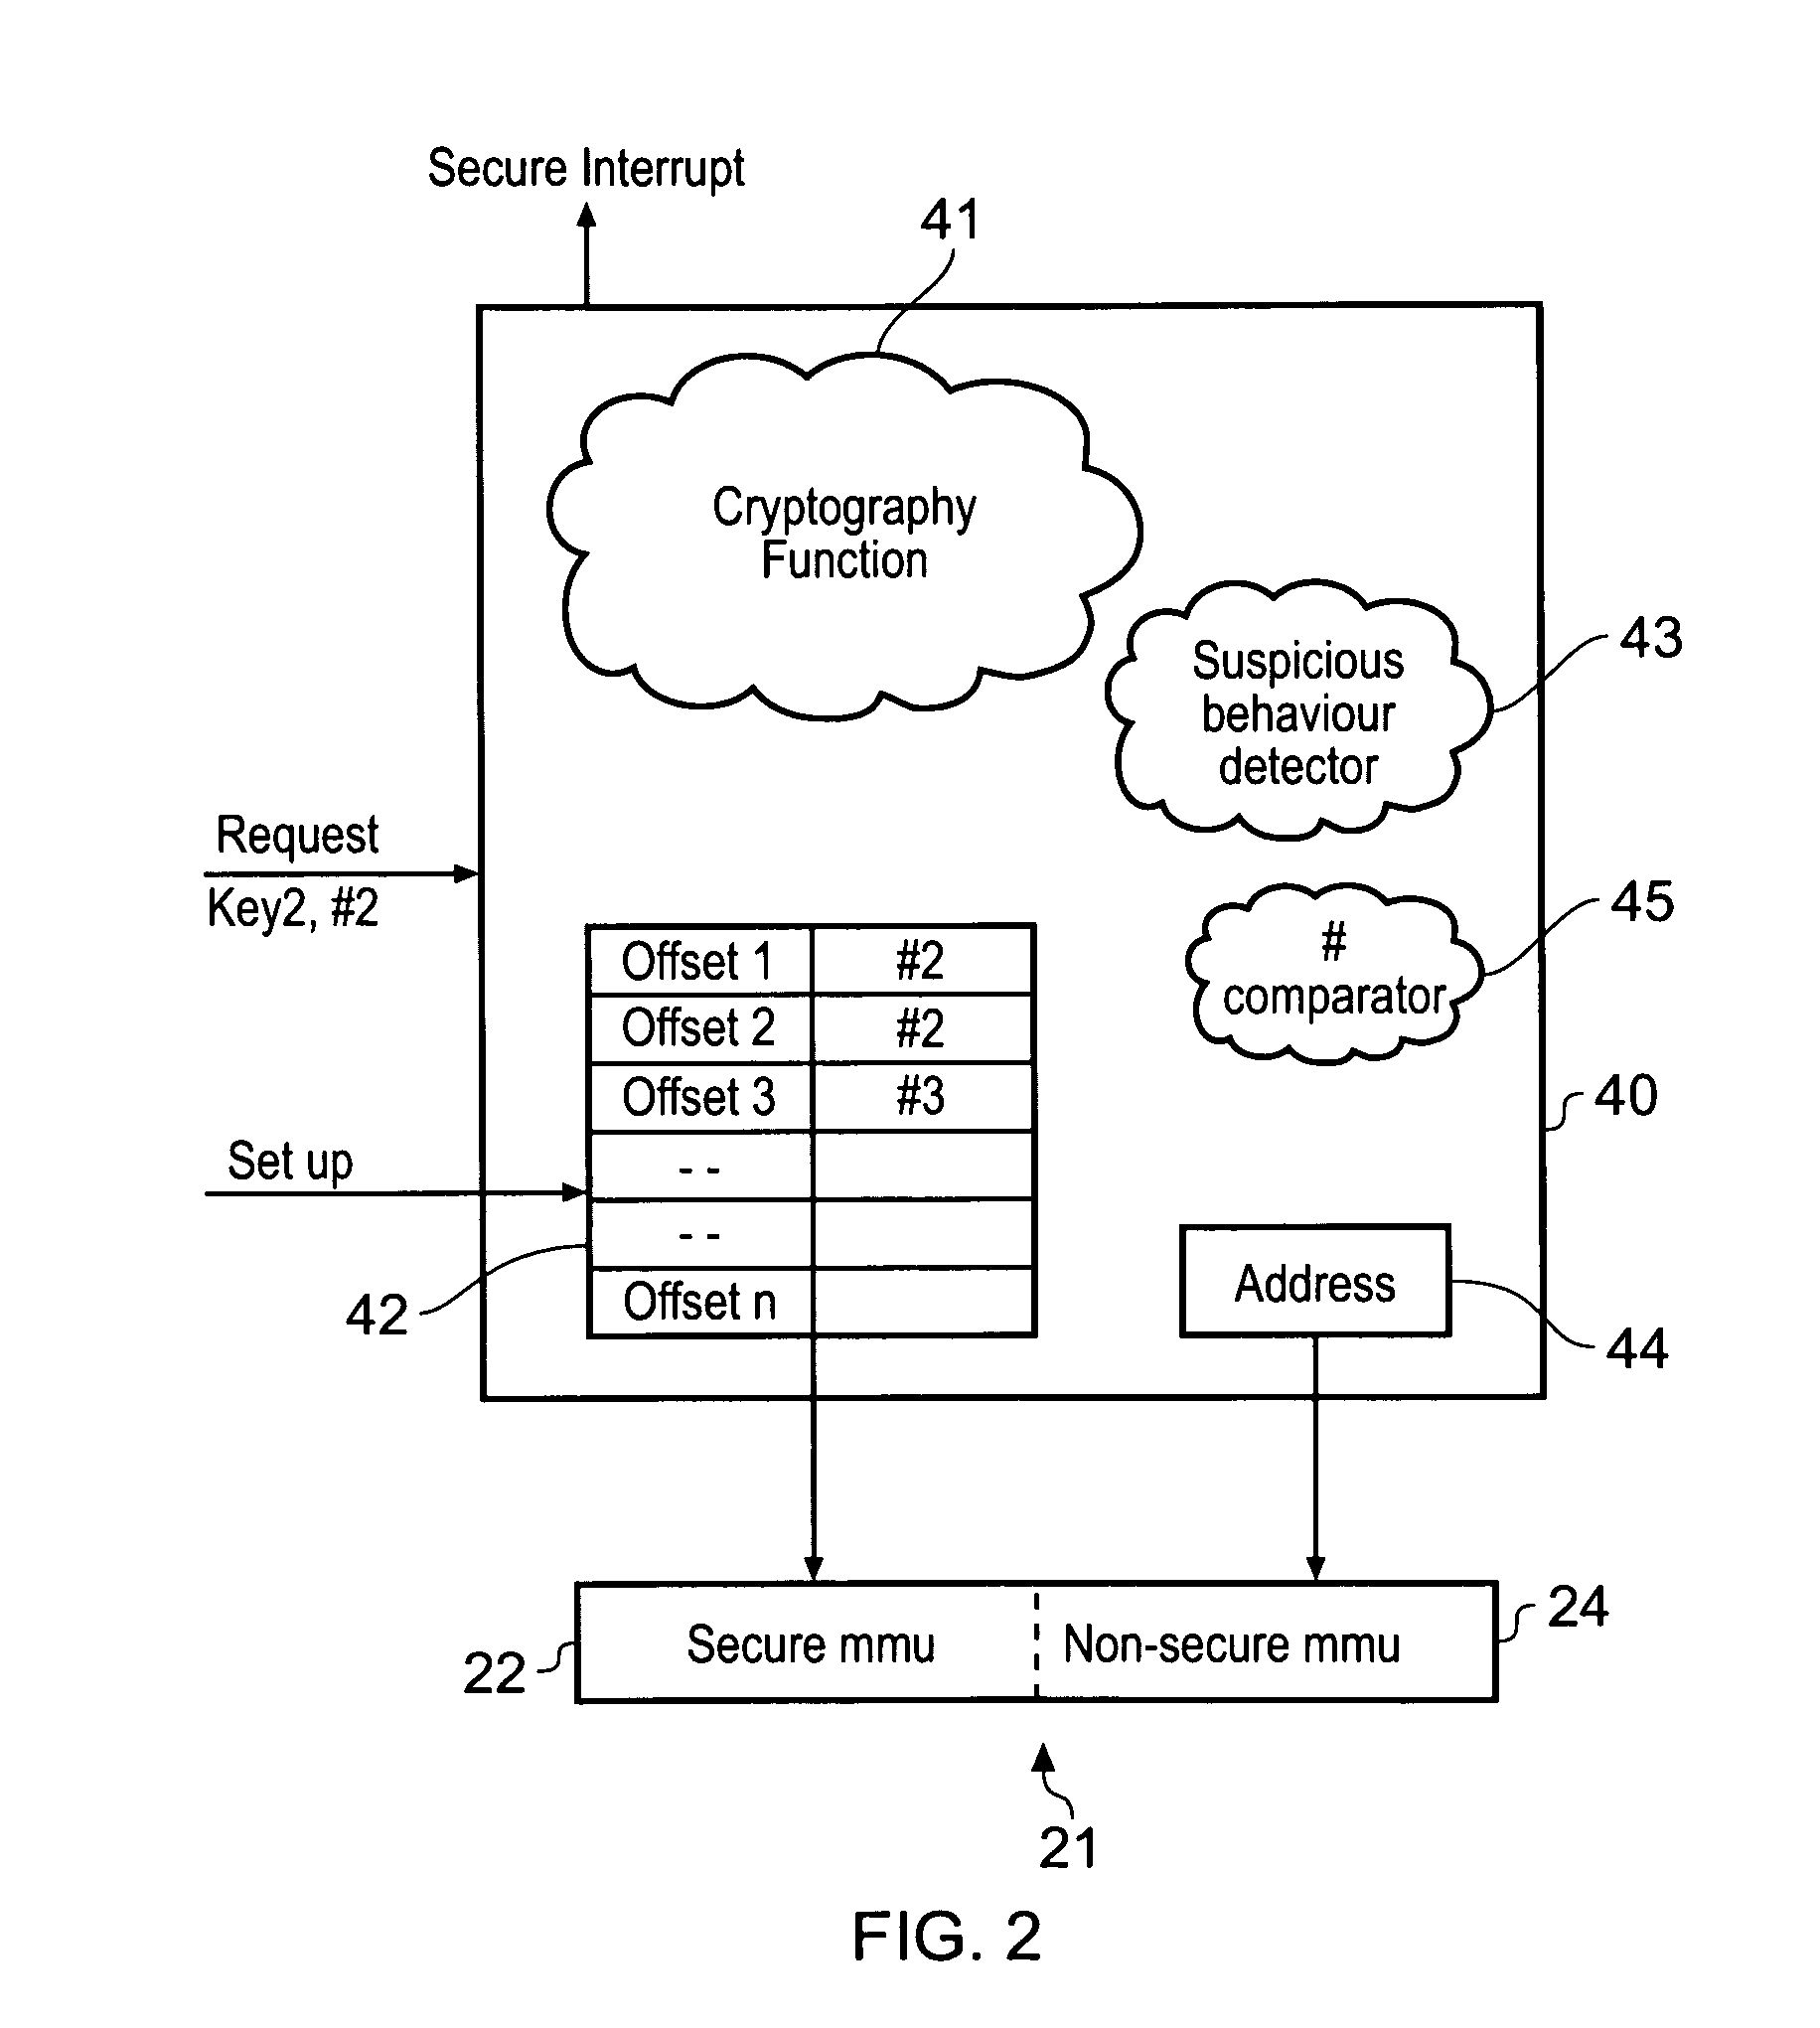 Providing secure services to a non-secure application